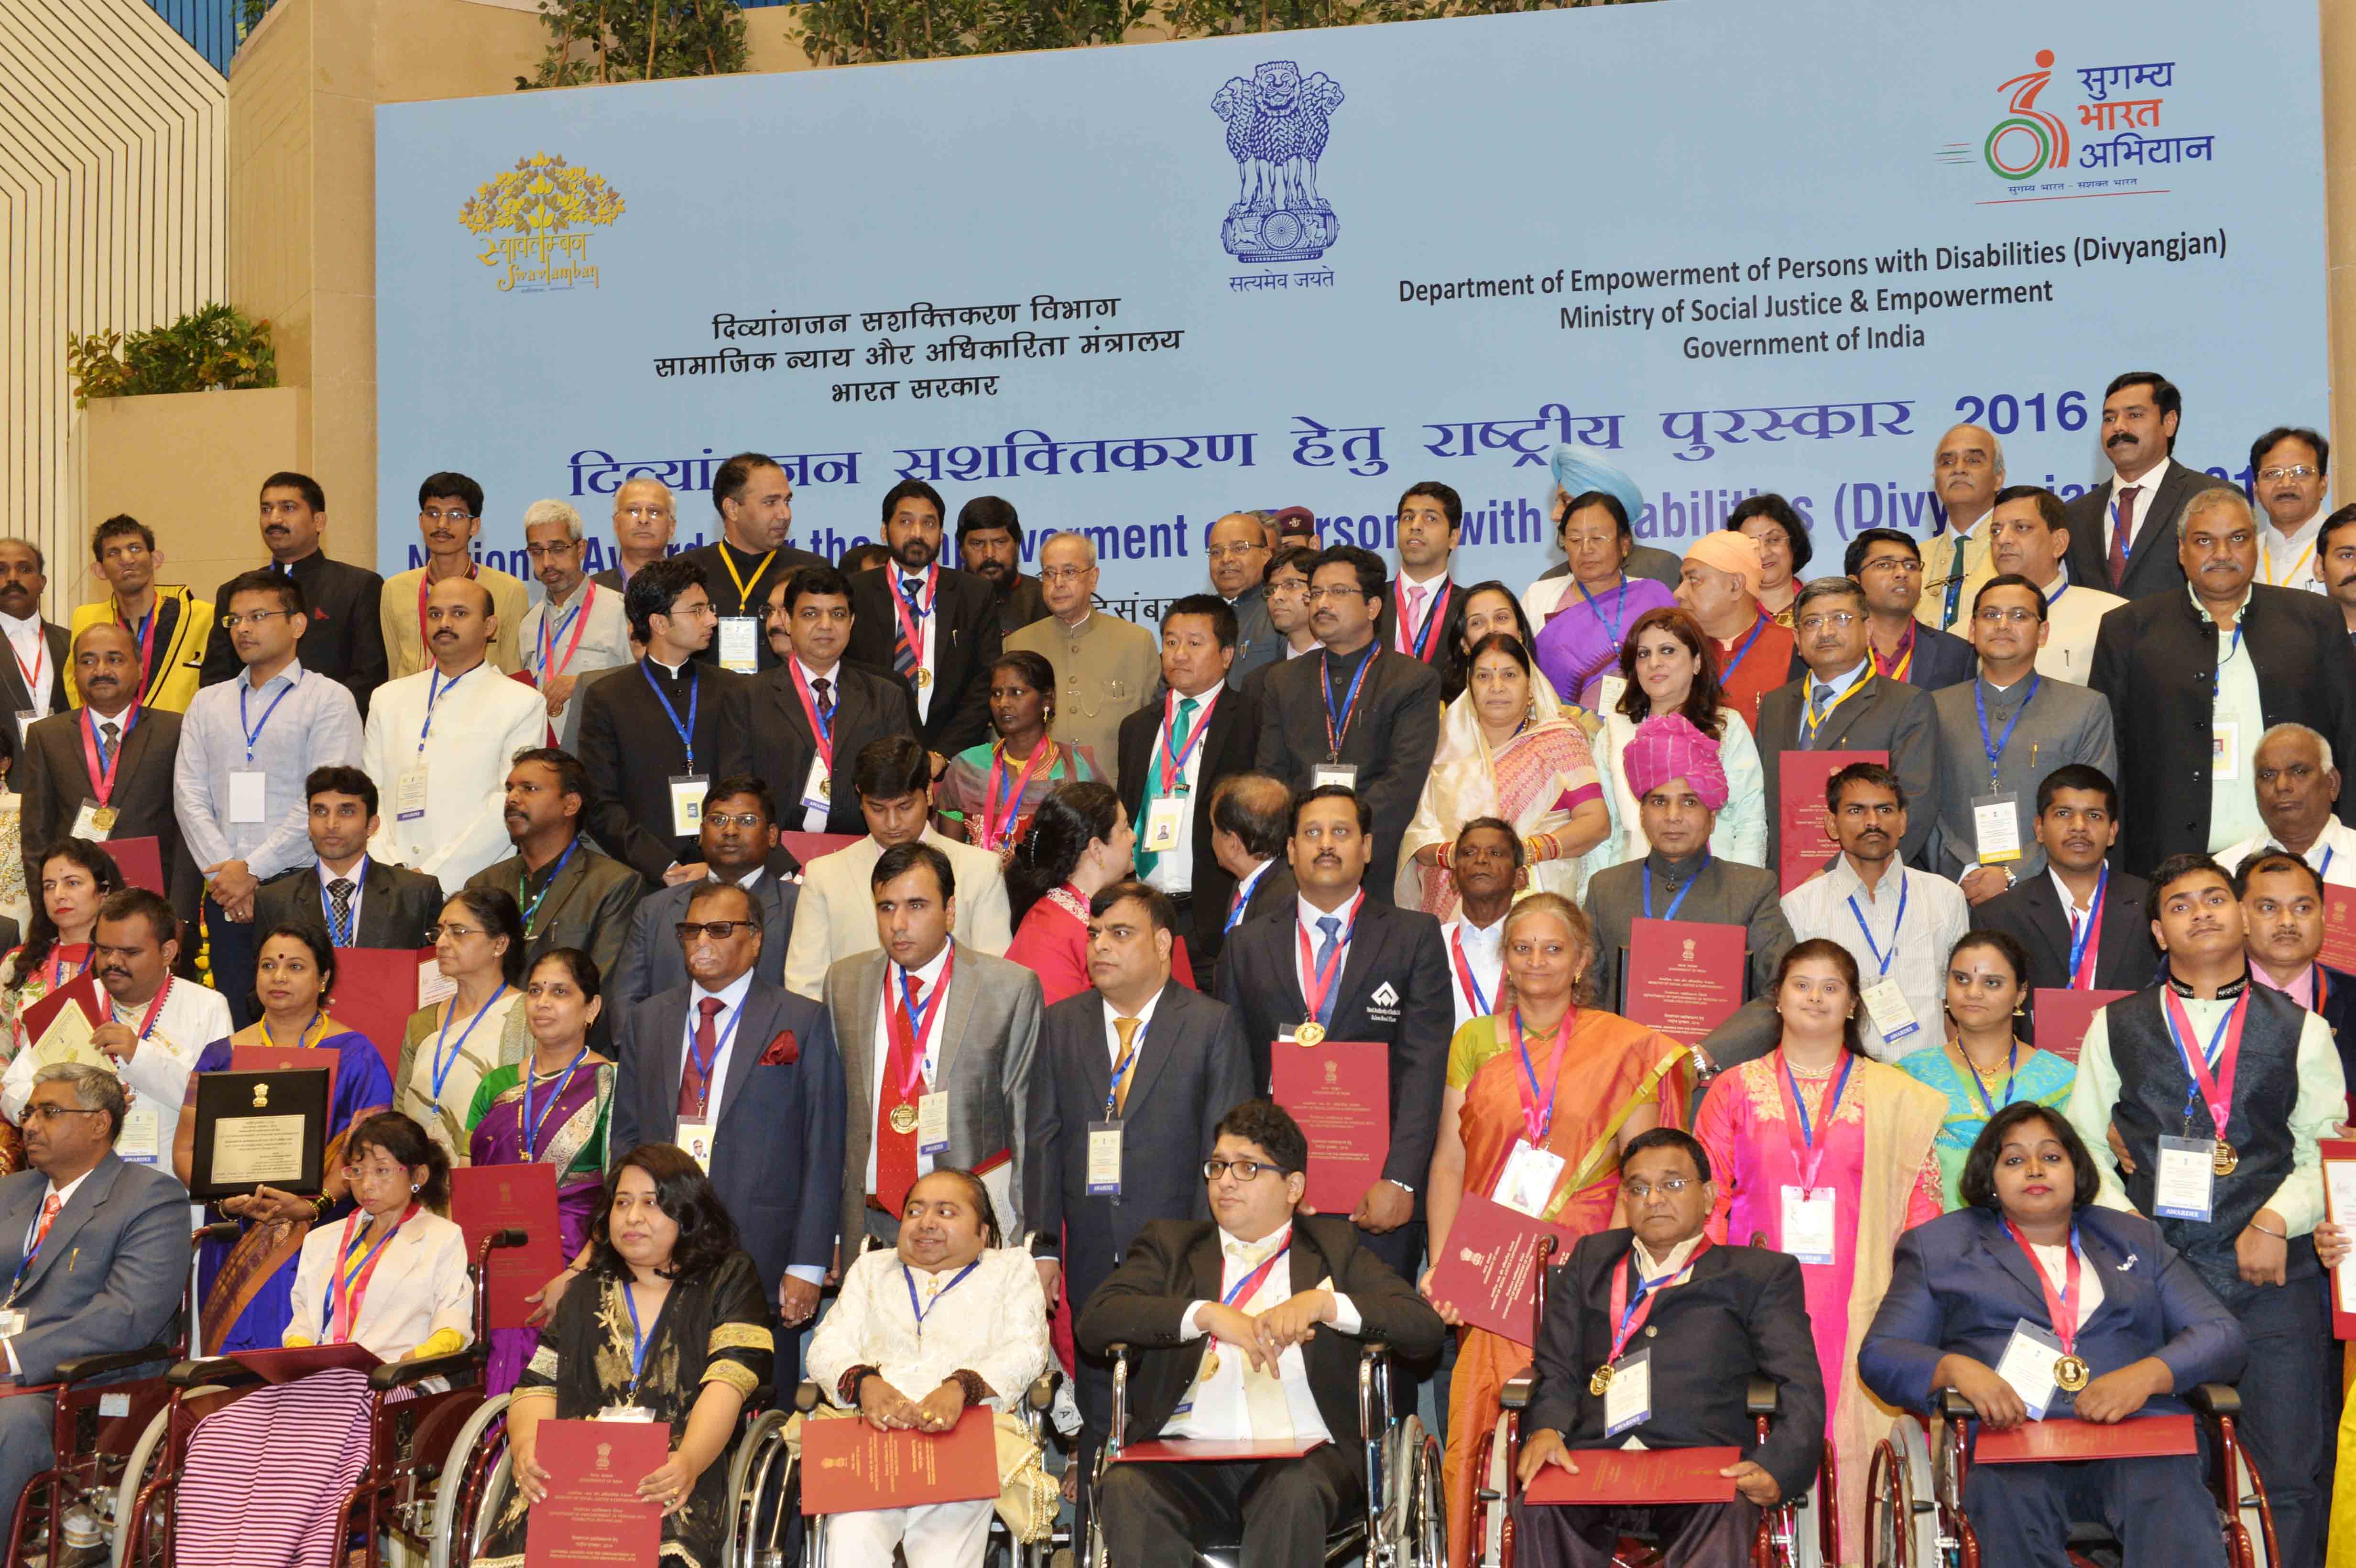 The President of India, Shri Pranab Mukherjee with National Awards for the Empowerment of Persons with Disabilities (Divyangjan) in New Delhi on December 3, 2016 on the occasion of International Day of Disabled Persons.